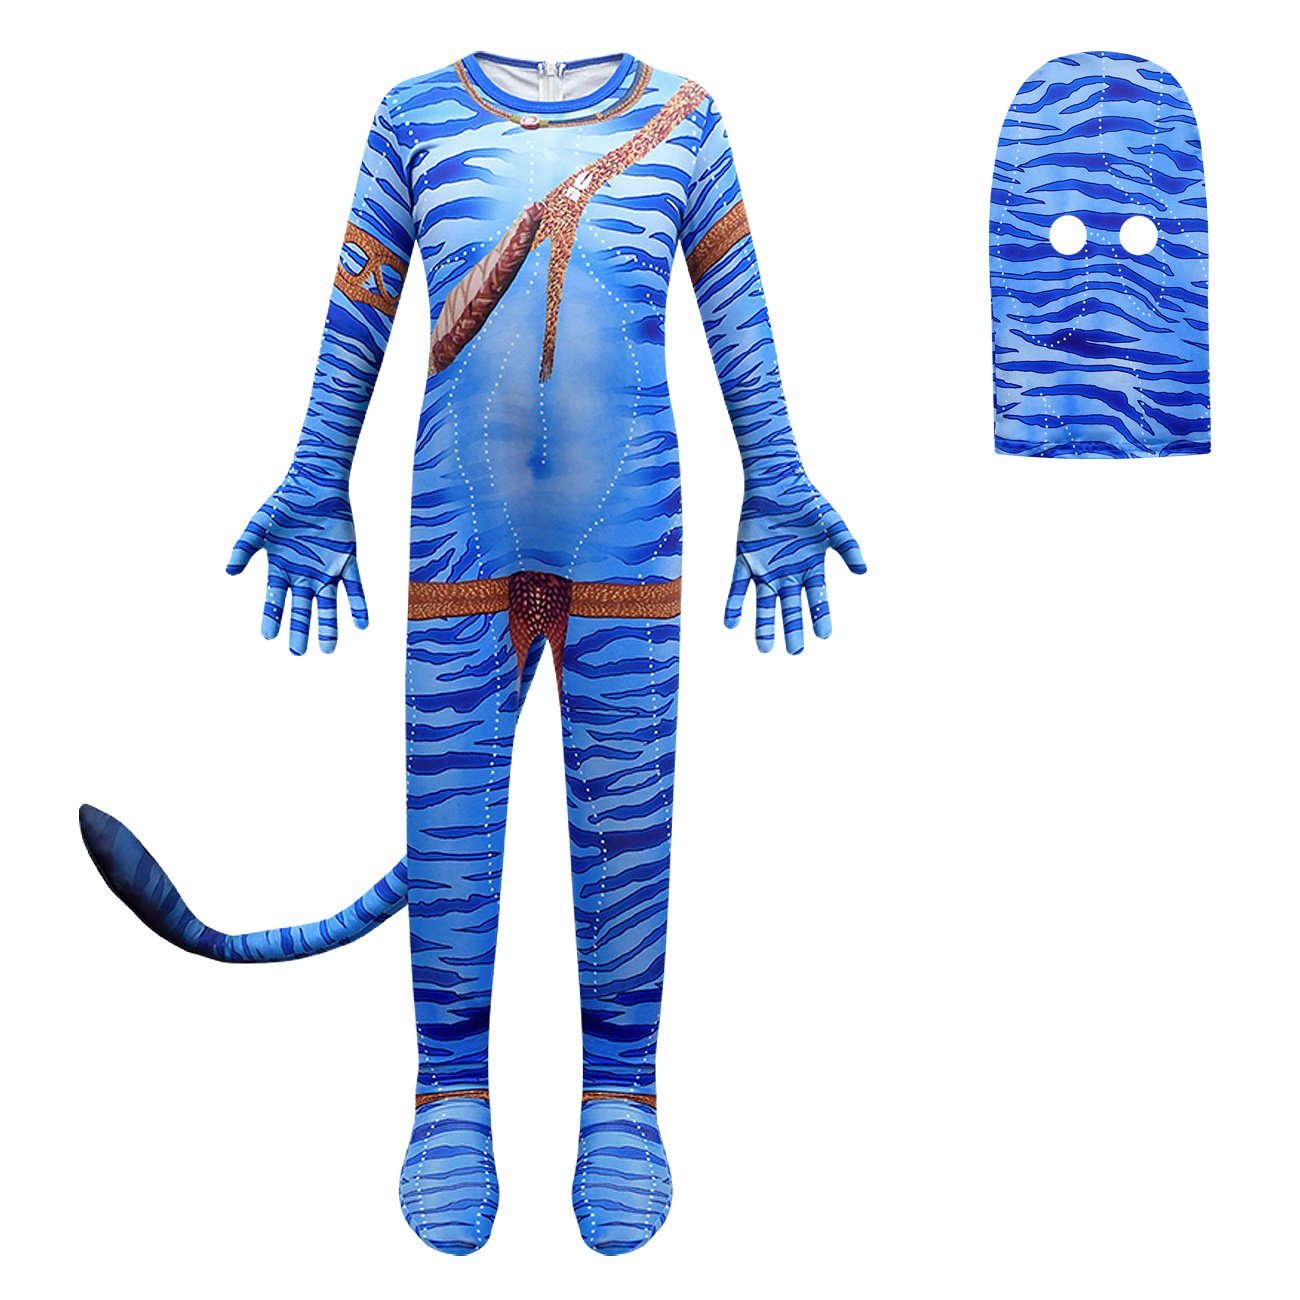 Avatar: The Way of Water Costume Blue Cosplay zentai  jumpsuit For Kids-Pajamasbuy